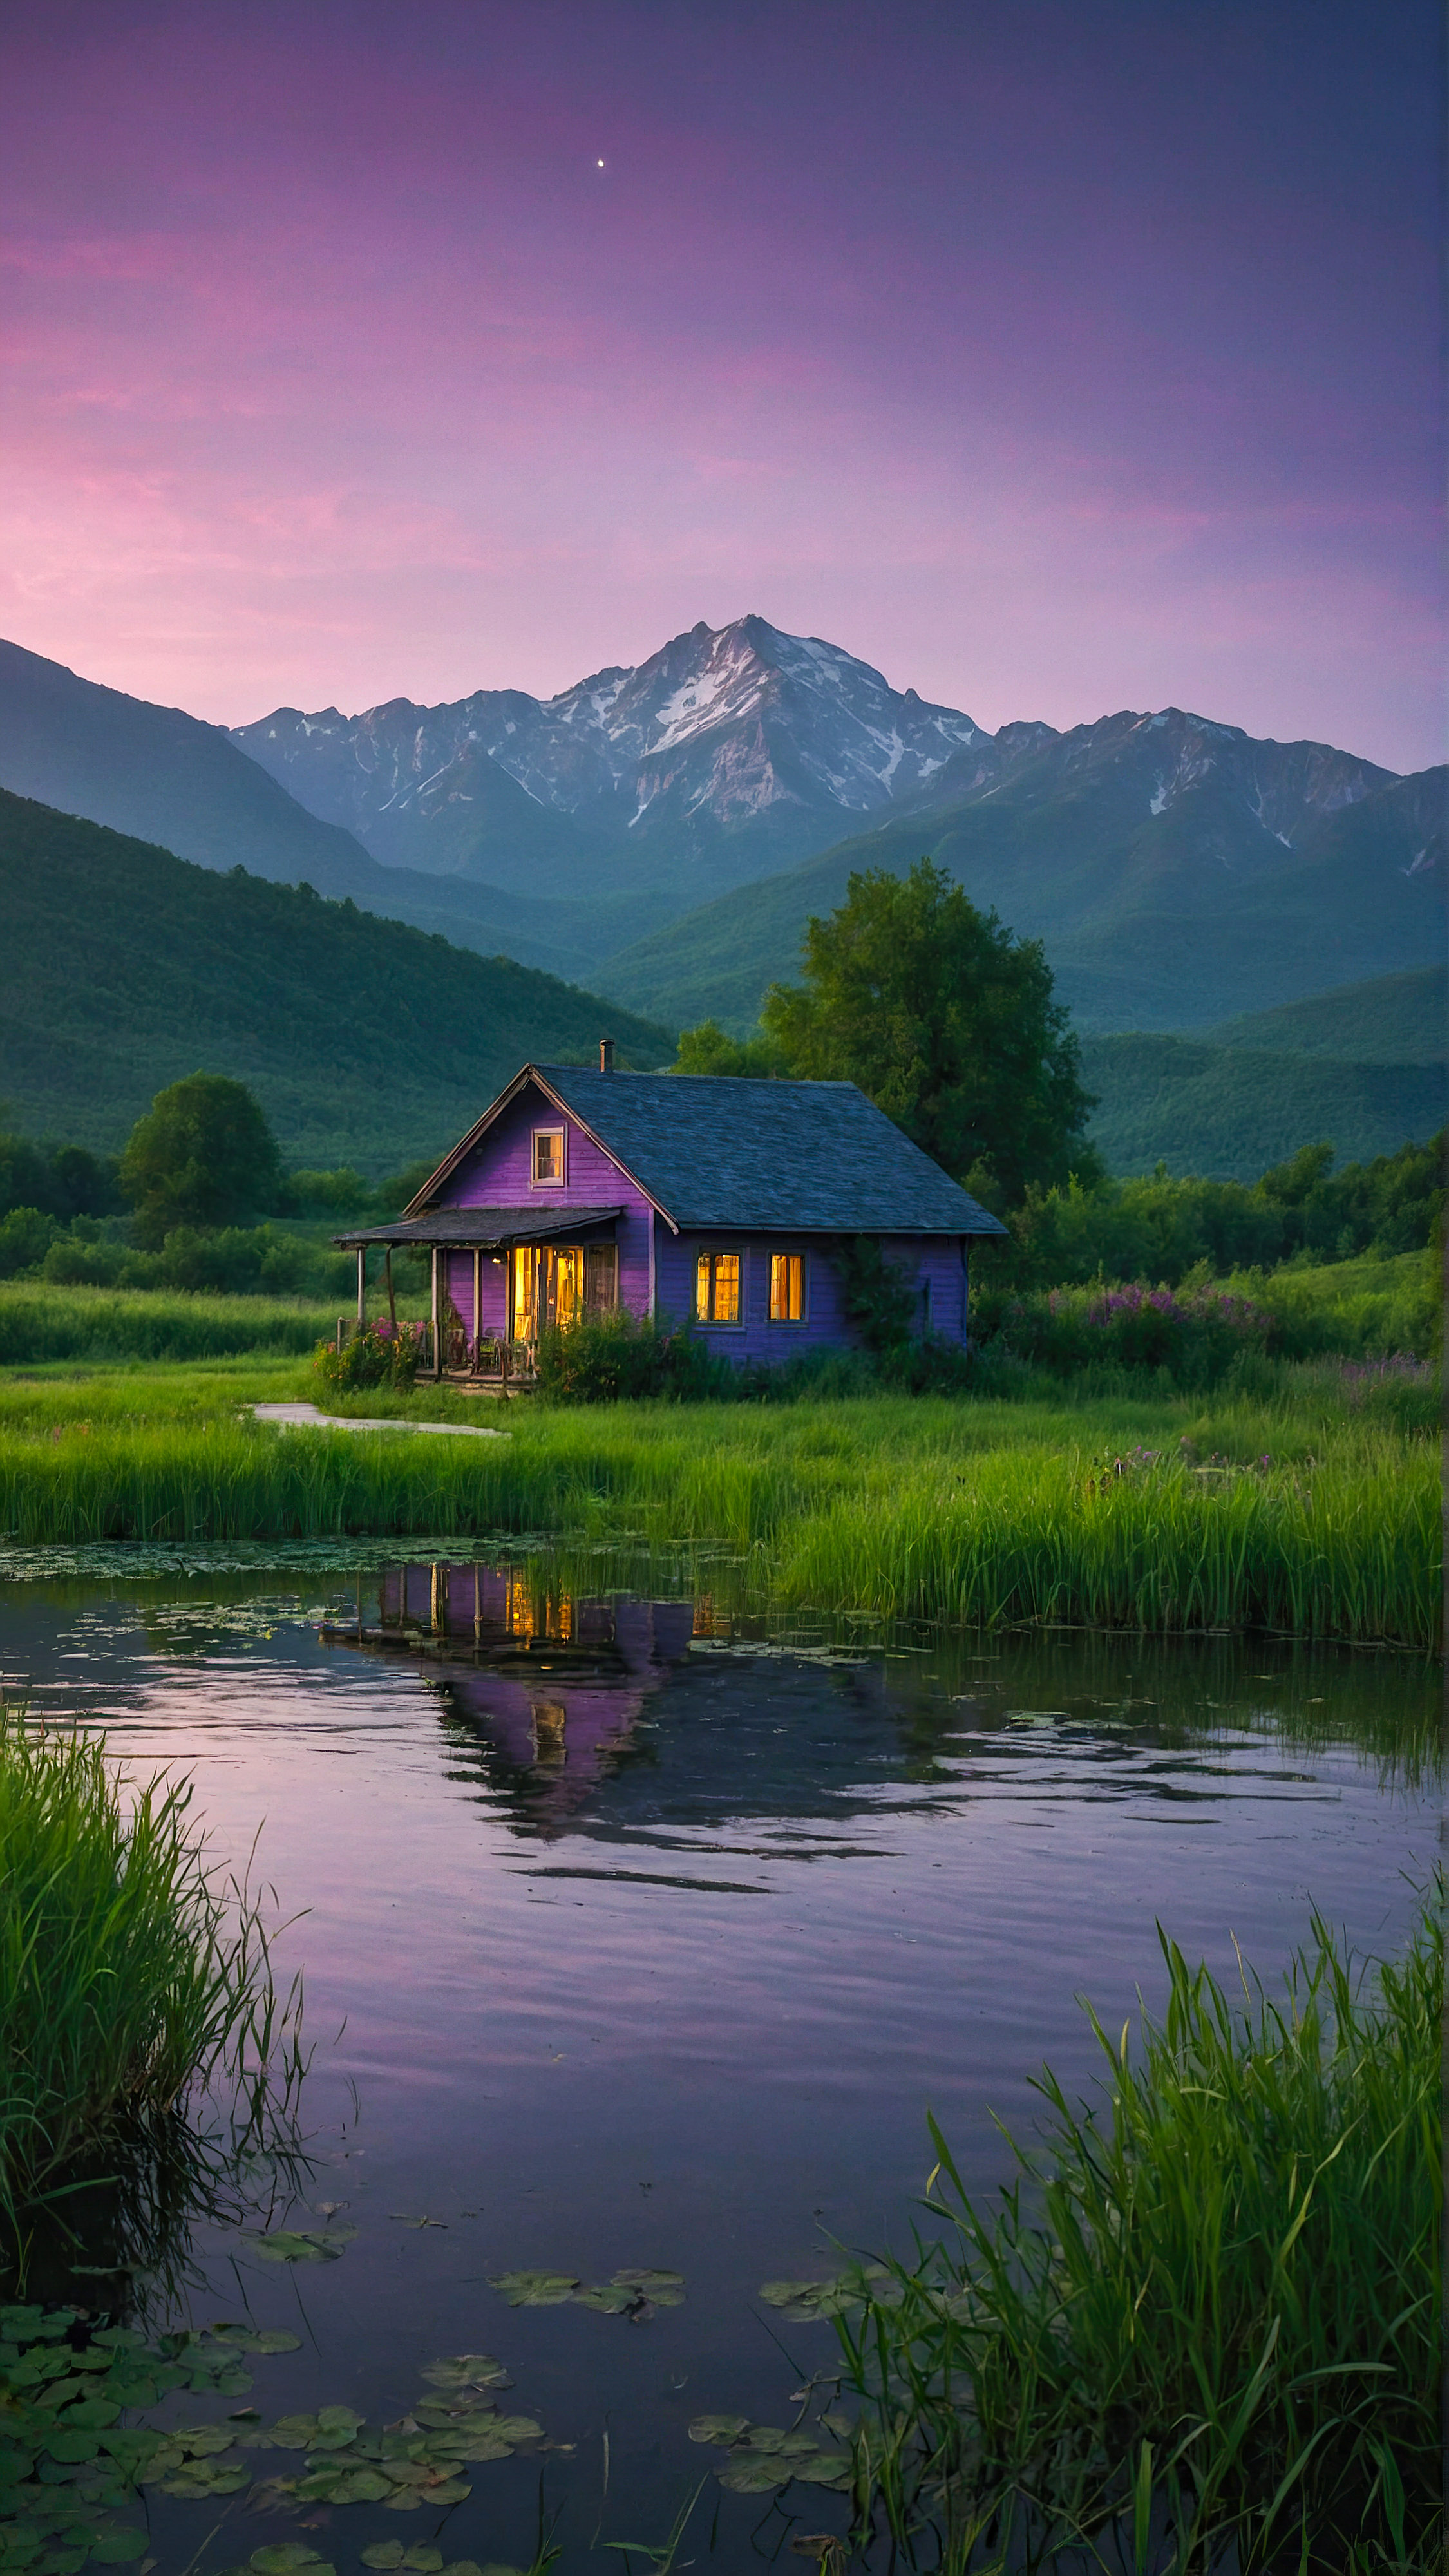 Transform your device’s look with the best iPhone home screen wallpaper, a serene and mystical evening landscape, featuring a small house by a pond, surrounded by lush greenery and towering mountains under a purple sky.